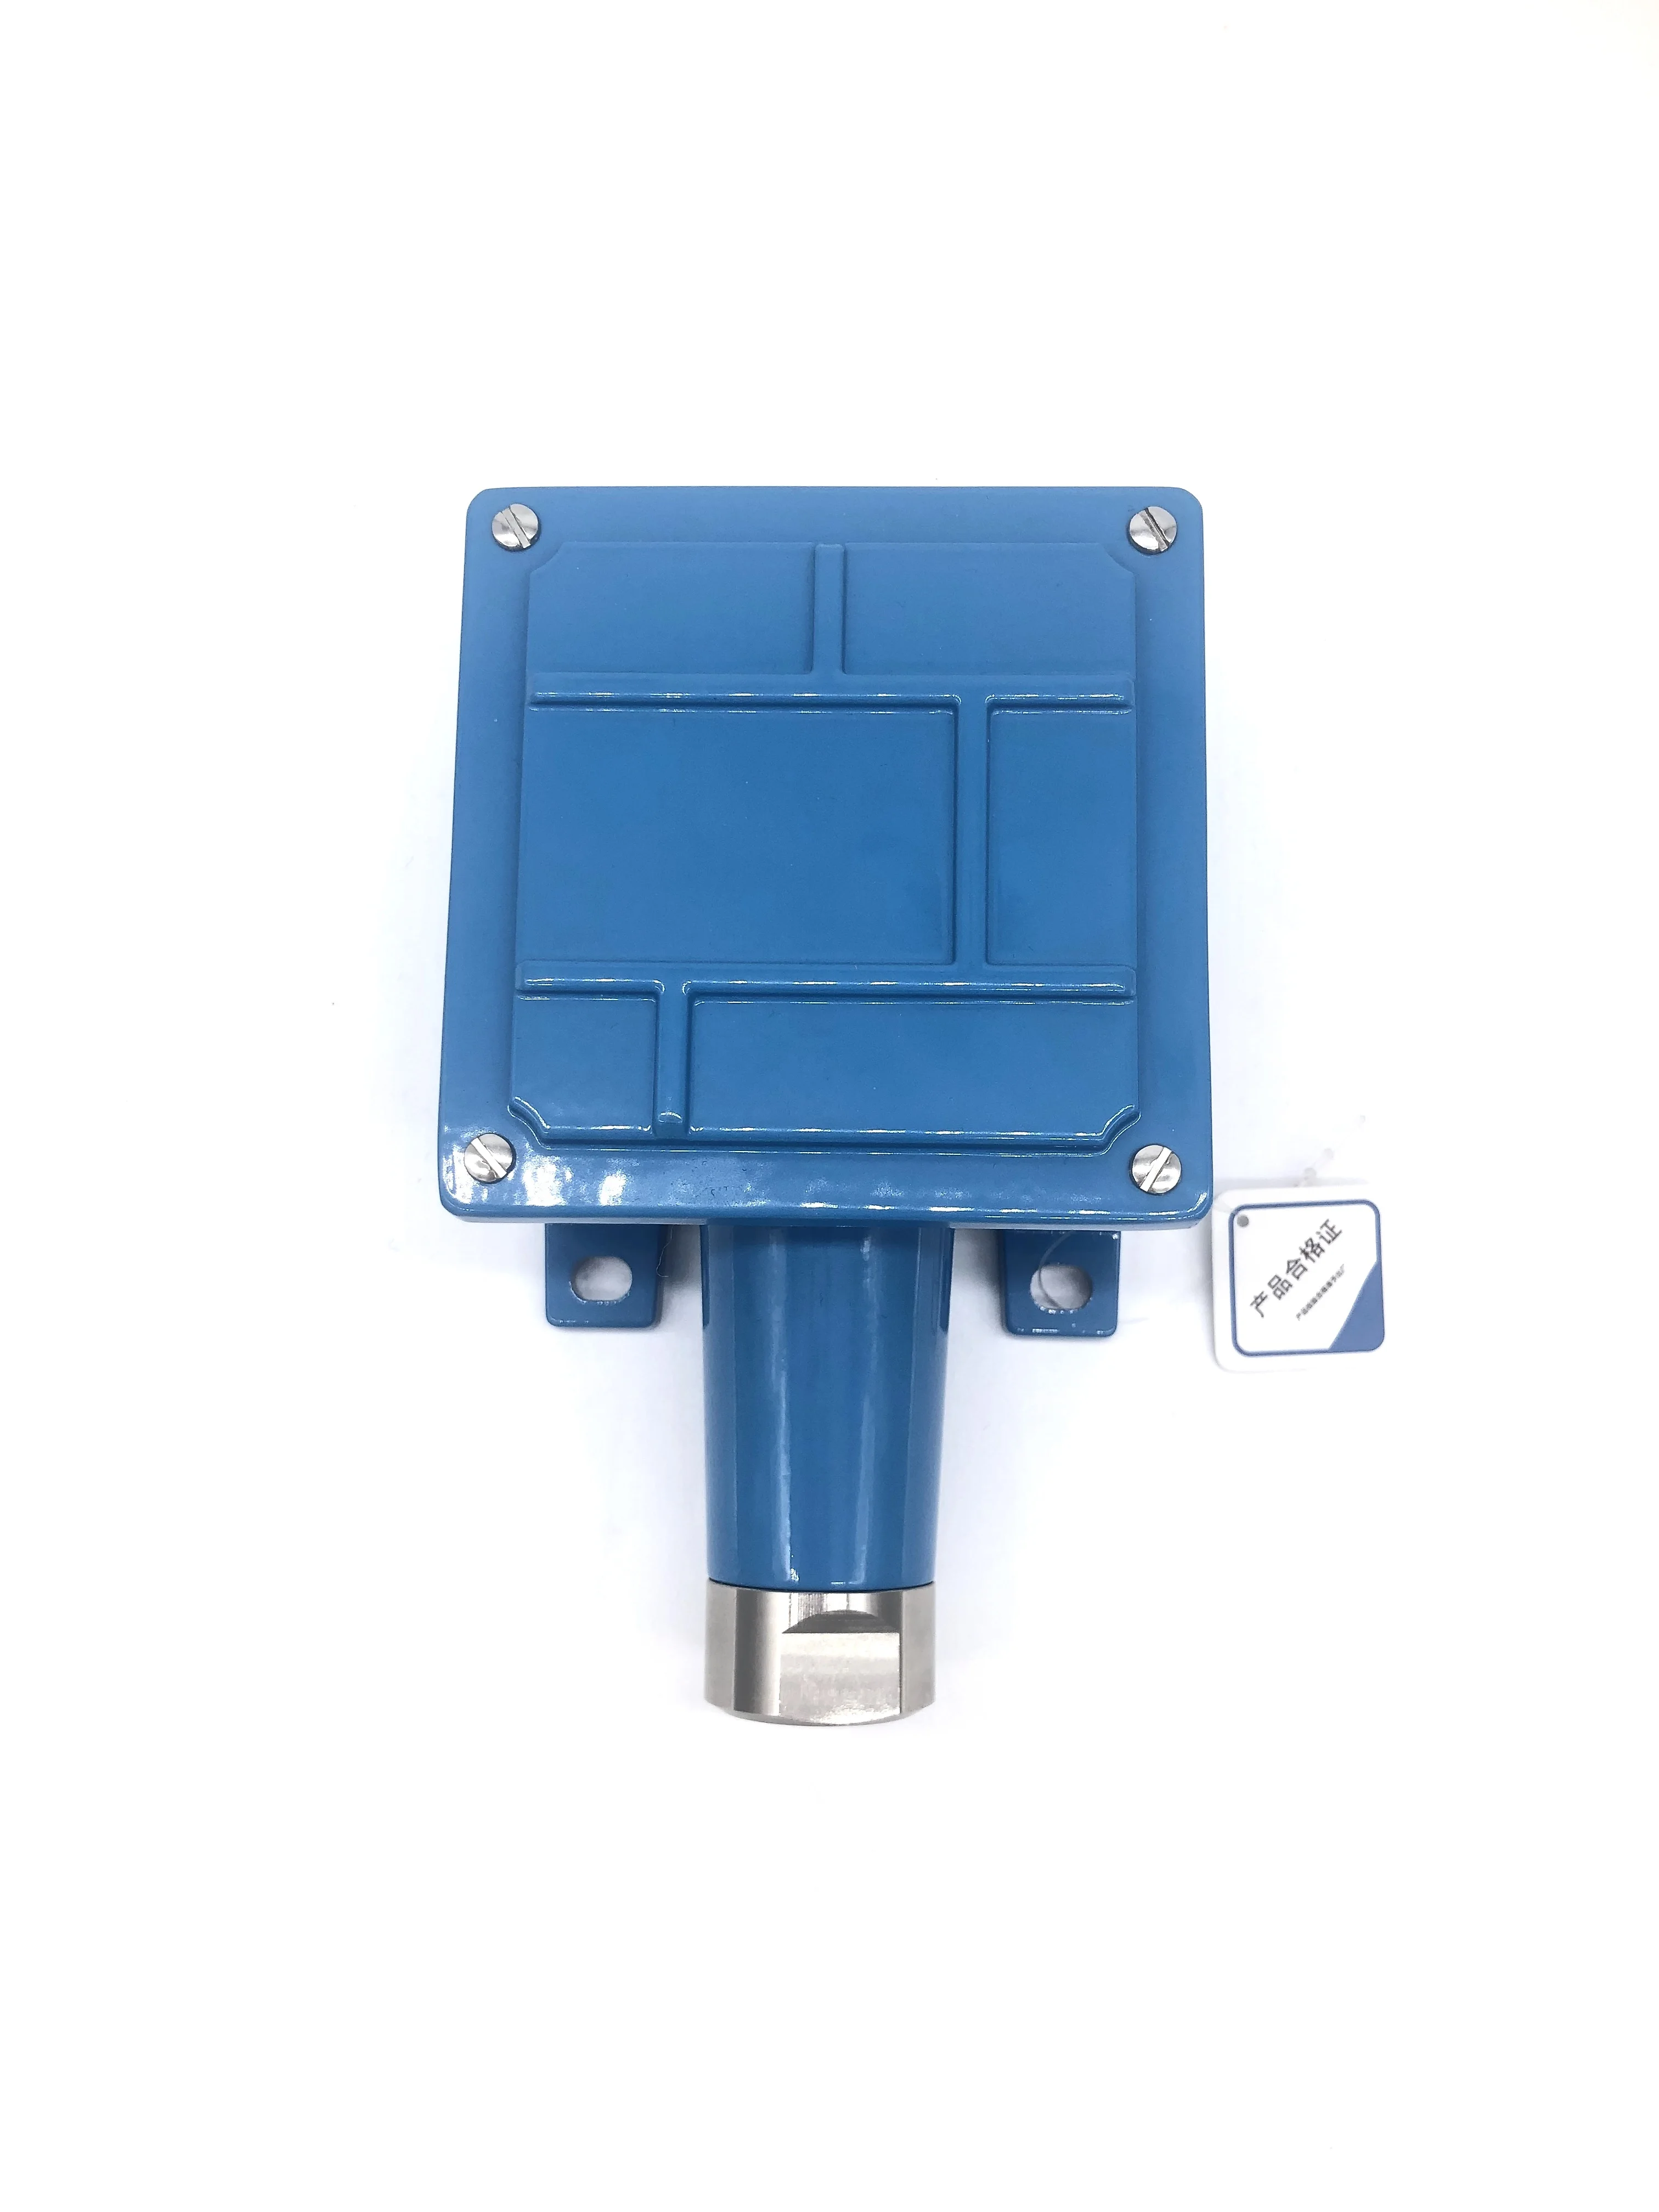 Electronic Gauge Pressure Switch Max Power Time RELAY Signal Output Liquid Temperature Origin Oil Type High Quality Diaphragm